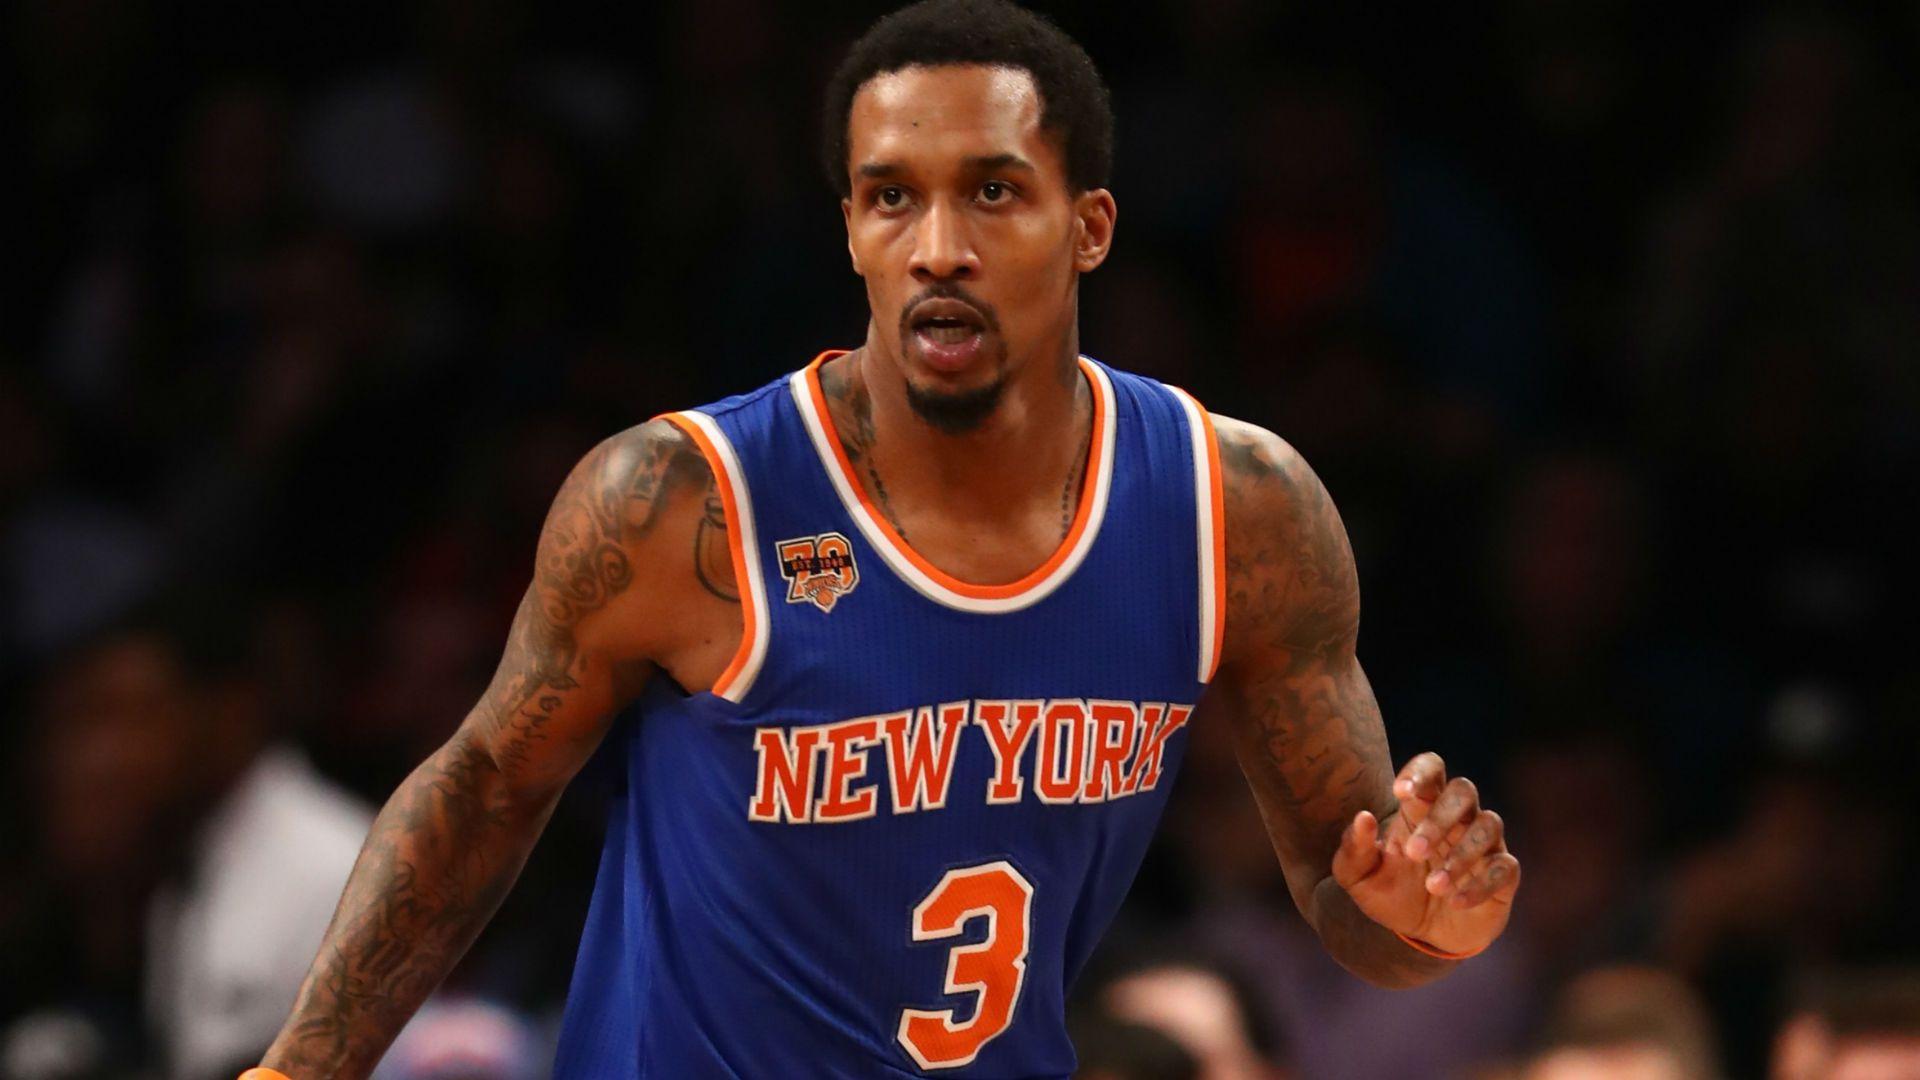 Brandon Jennings asked Knicks for release so he can play